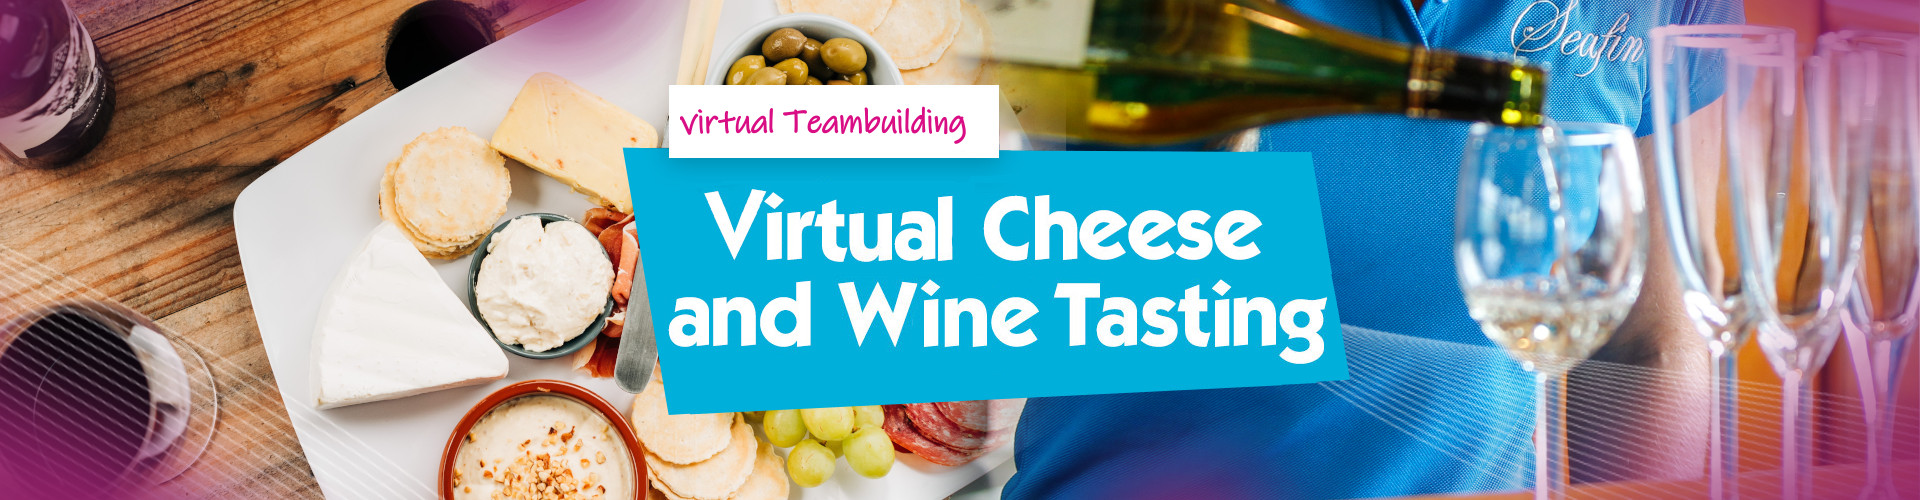 Virtual Cheese and Wine Tasting - Banner